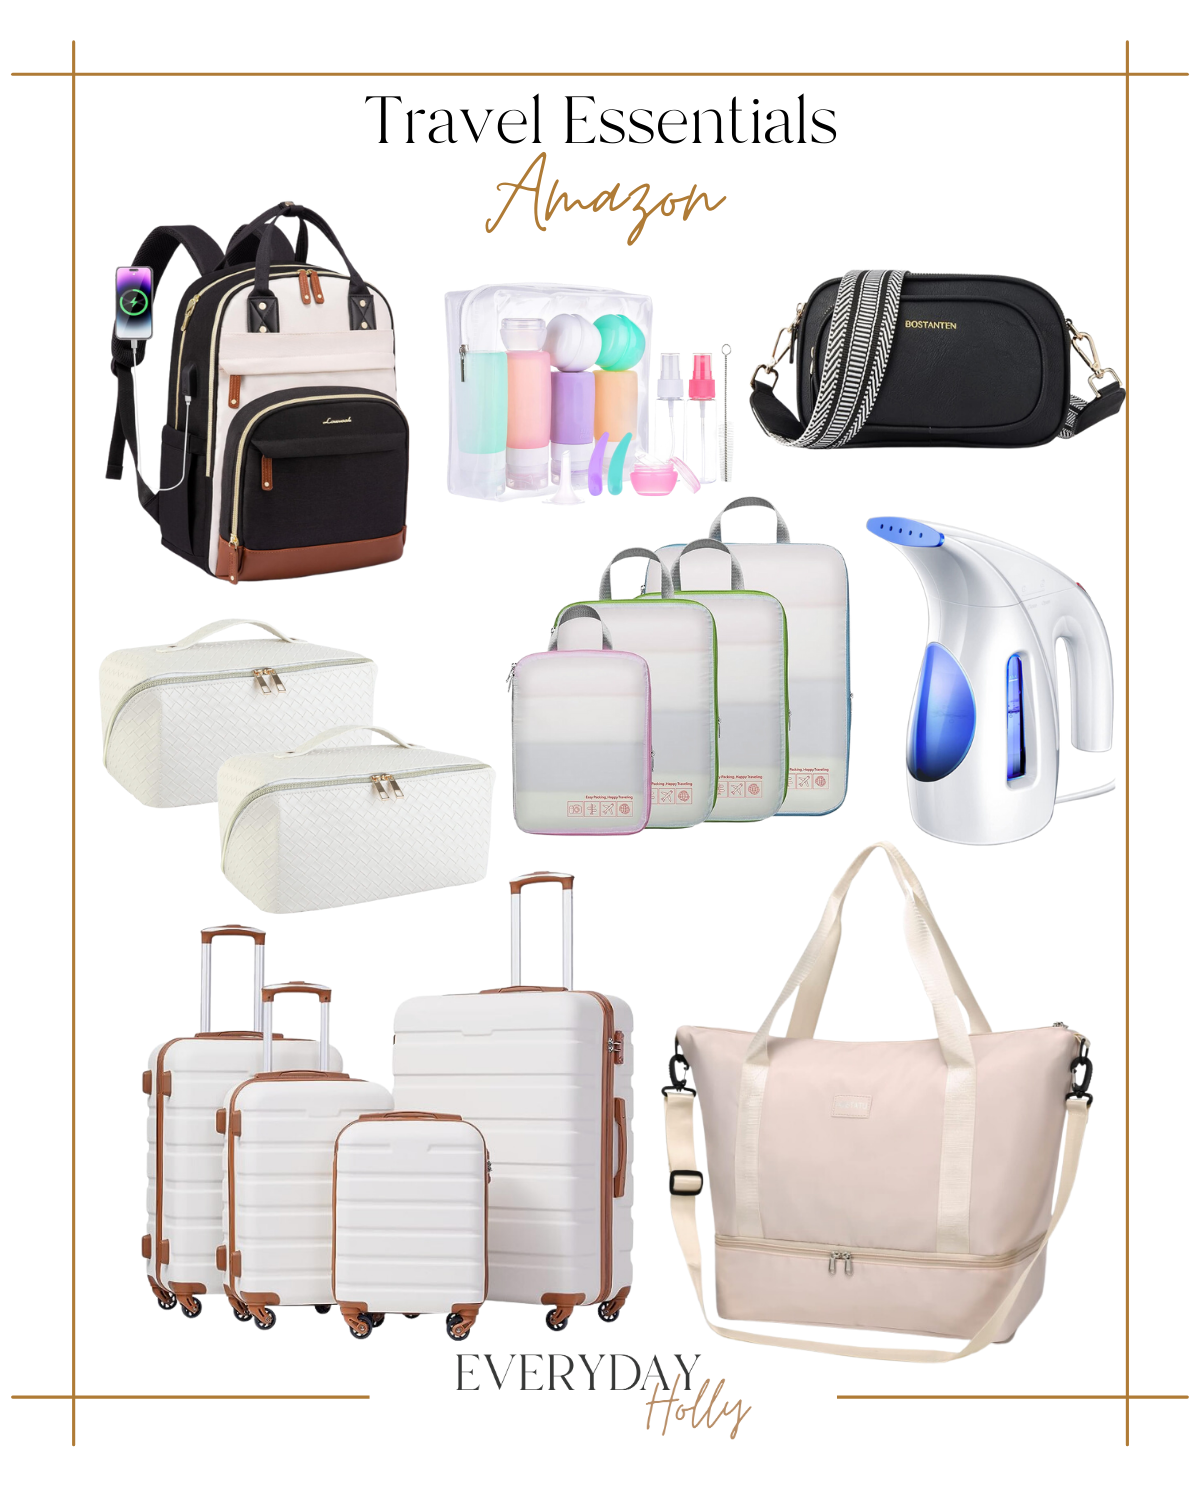 The Best Styles for Every Occasion + Travel Essentials | #best #styles #every #occasion #travel #essentials #musthaves #laptopbackpack #backpack #crossbody #travelbottle #makeupbag #packingcubes #garment #steamer #luggage #suitcase #weekender